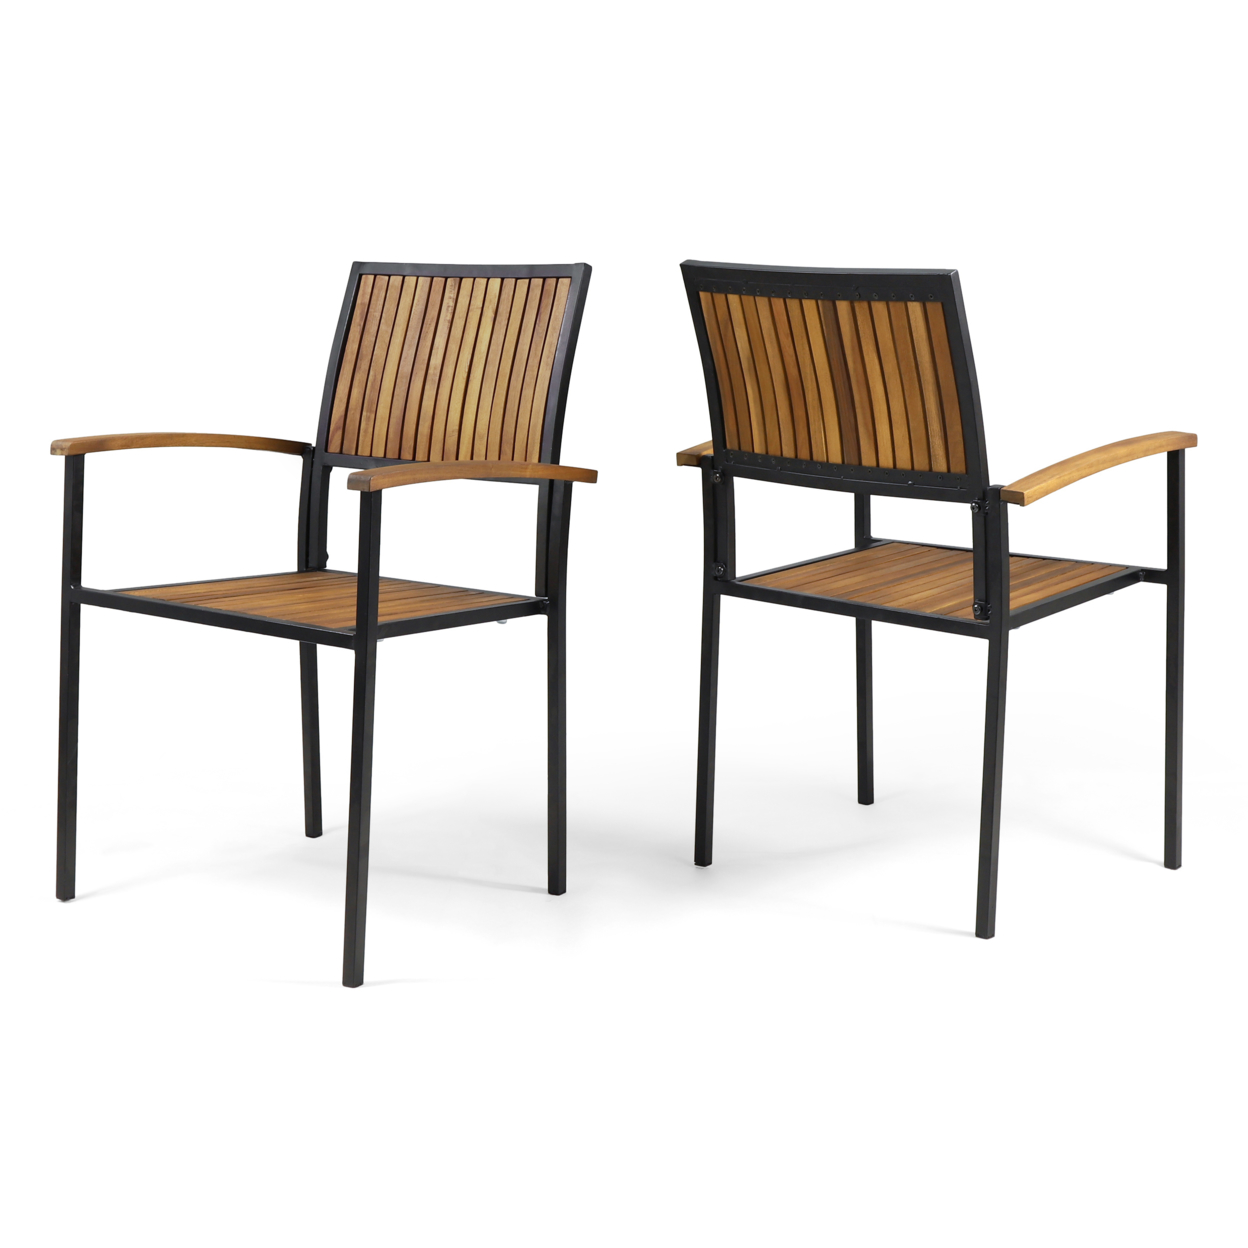 Owen Outdoor Wood And Iron Dining Chair (Set Of 2) - Teak Finish + Black Finish